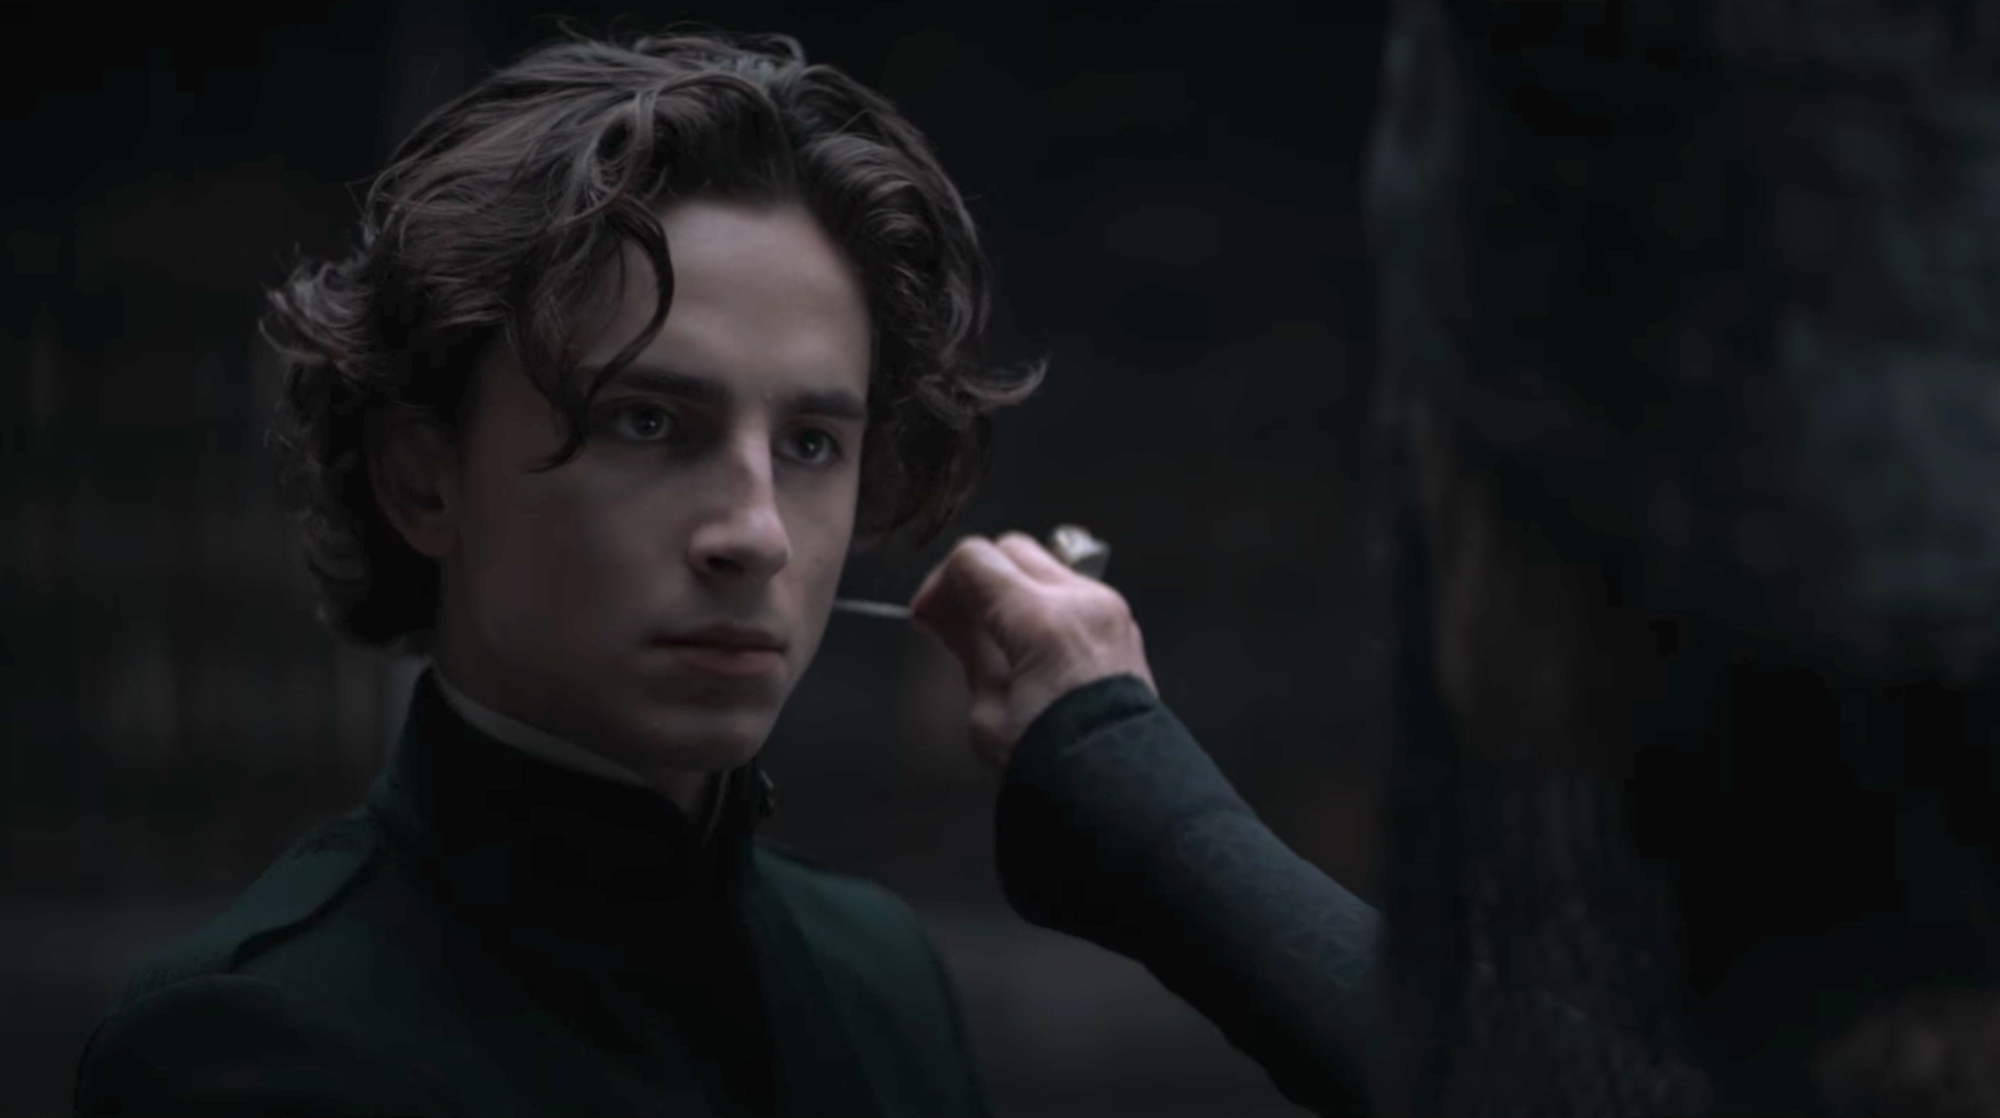 Timothée Chalamet and Charlotte Rampling in the 'Dune' Gom Jabbar scene. Chalamet looks at Rampling with a serious face as she holds a poisoned needle to his neck. He wears a green military-looking jacket with a high neck. Rampling wears all black and a black, beaded veil over her face. They're in a dimly lit library.